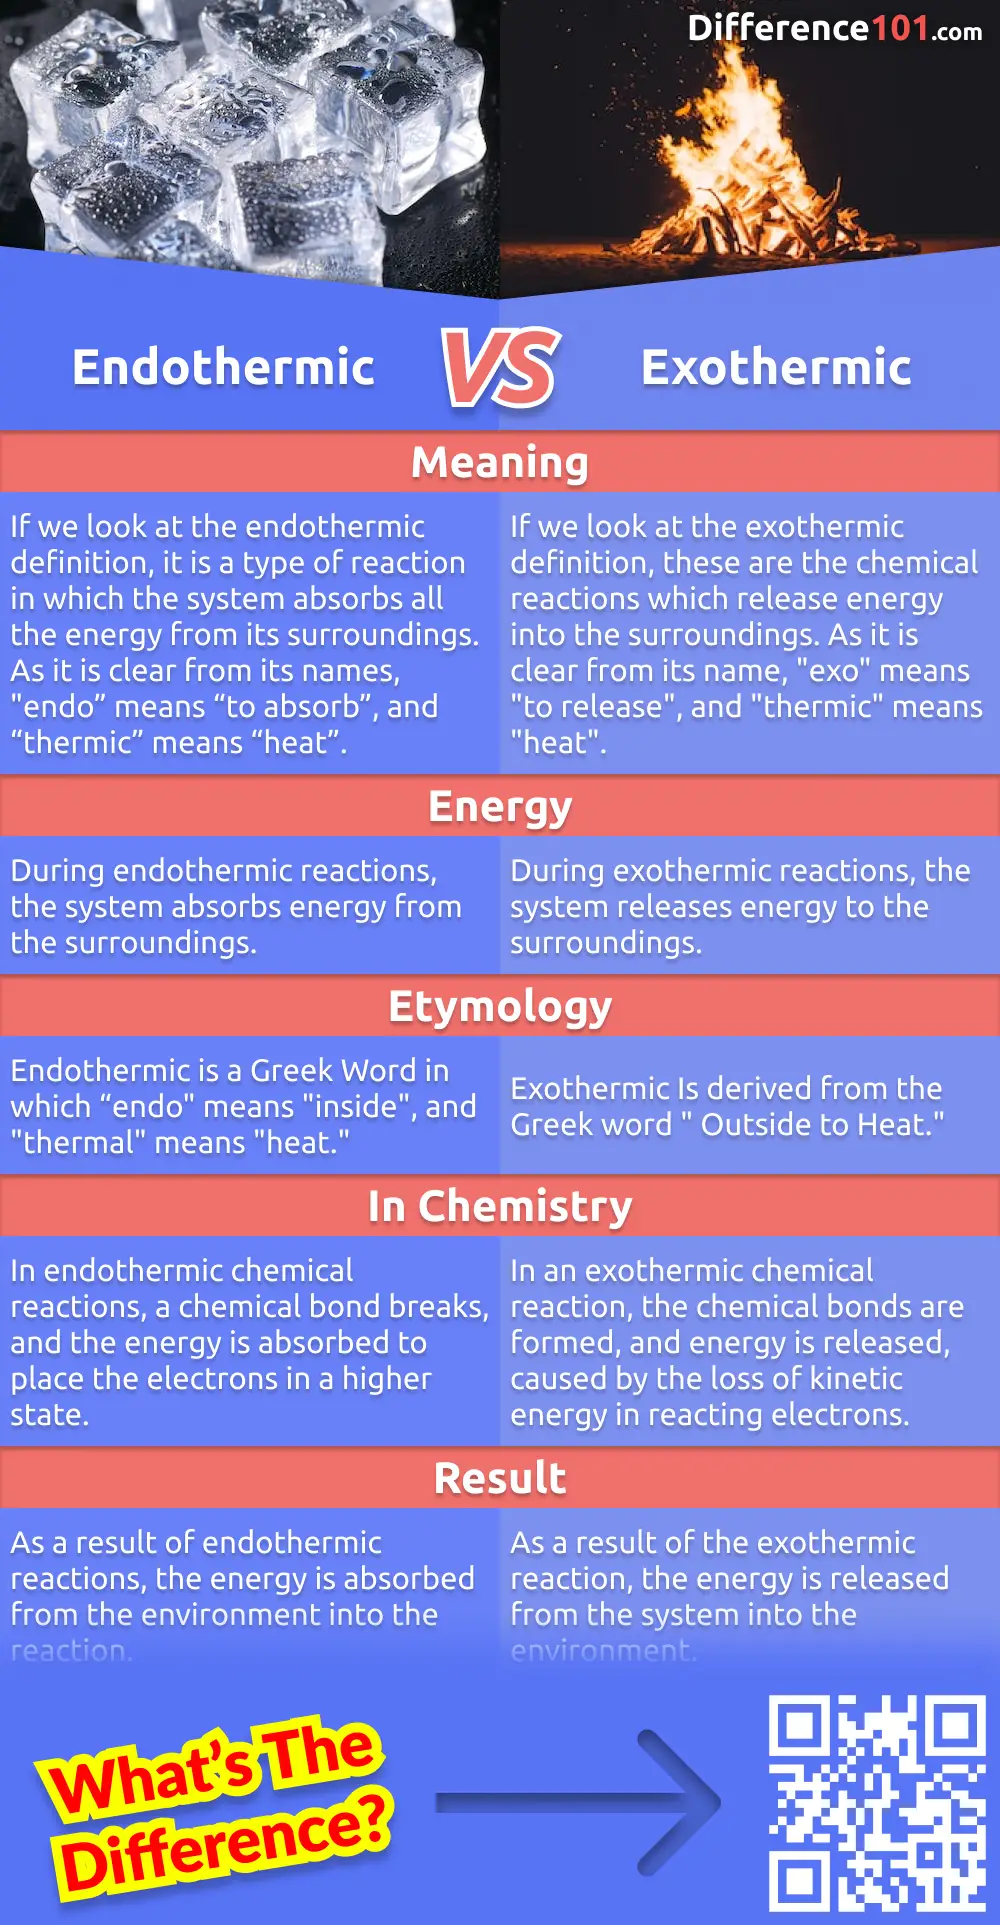 What’s the difference between endothermic and exothermic? Endothermic reactions are reactions that absorb heat, while exothermic reactions release heat. Read on to learn more about their differences and examples.